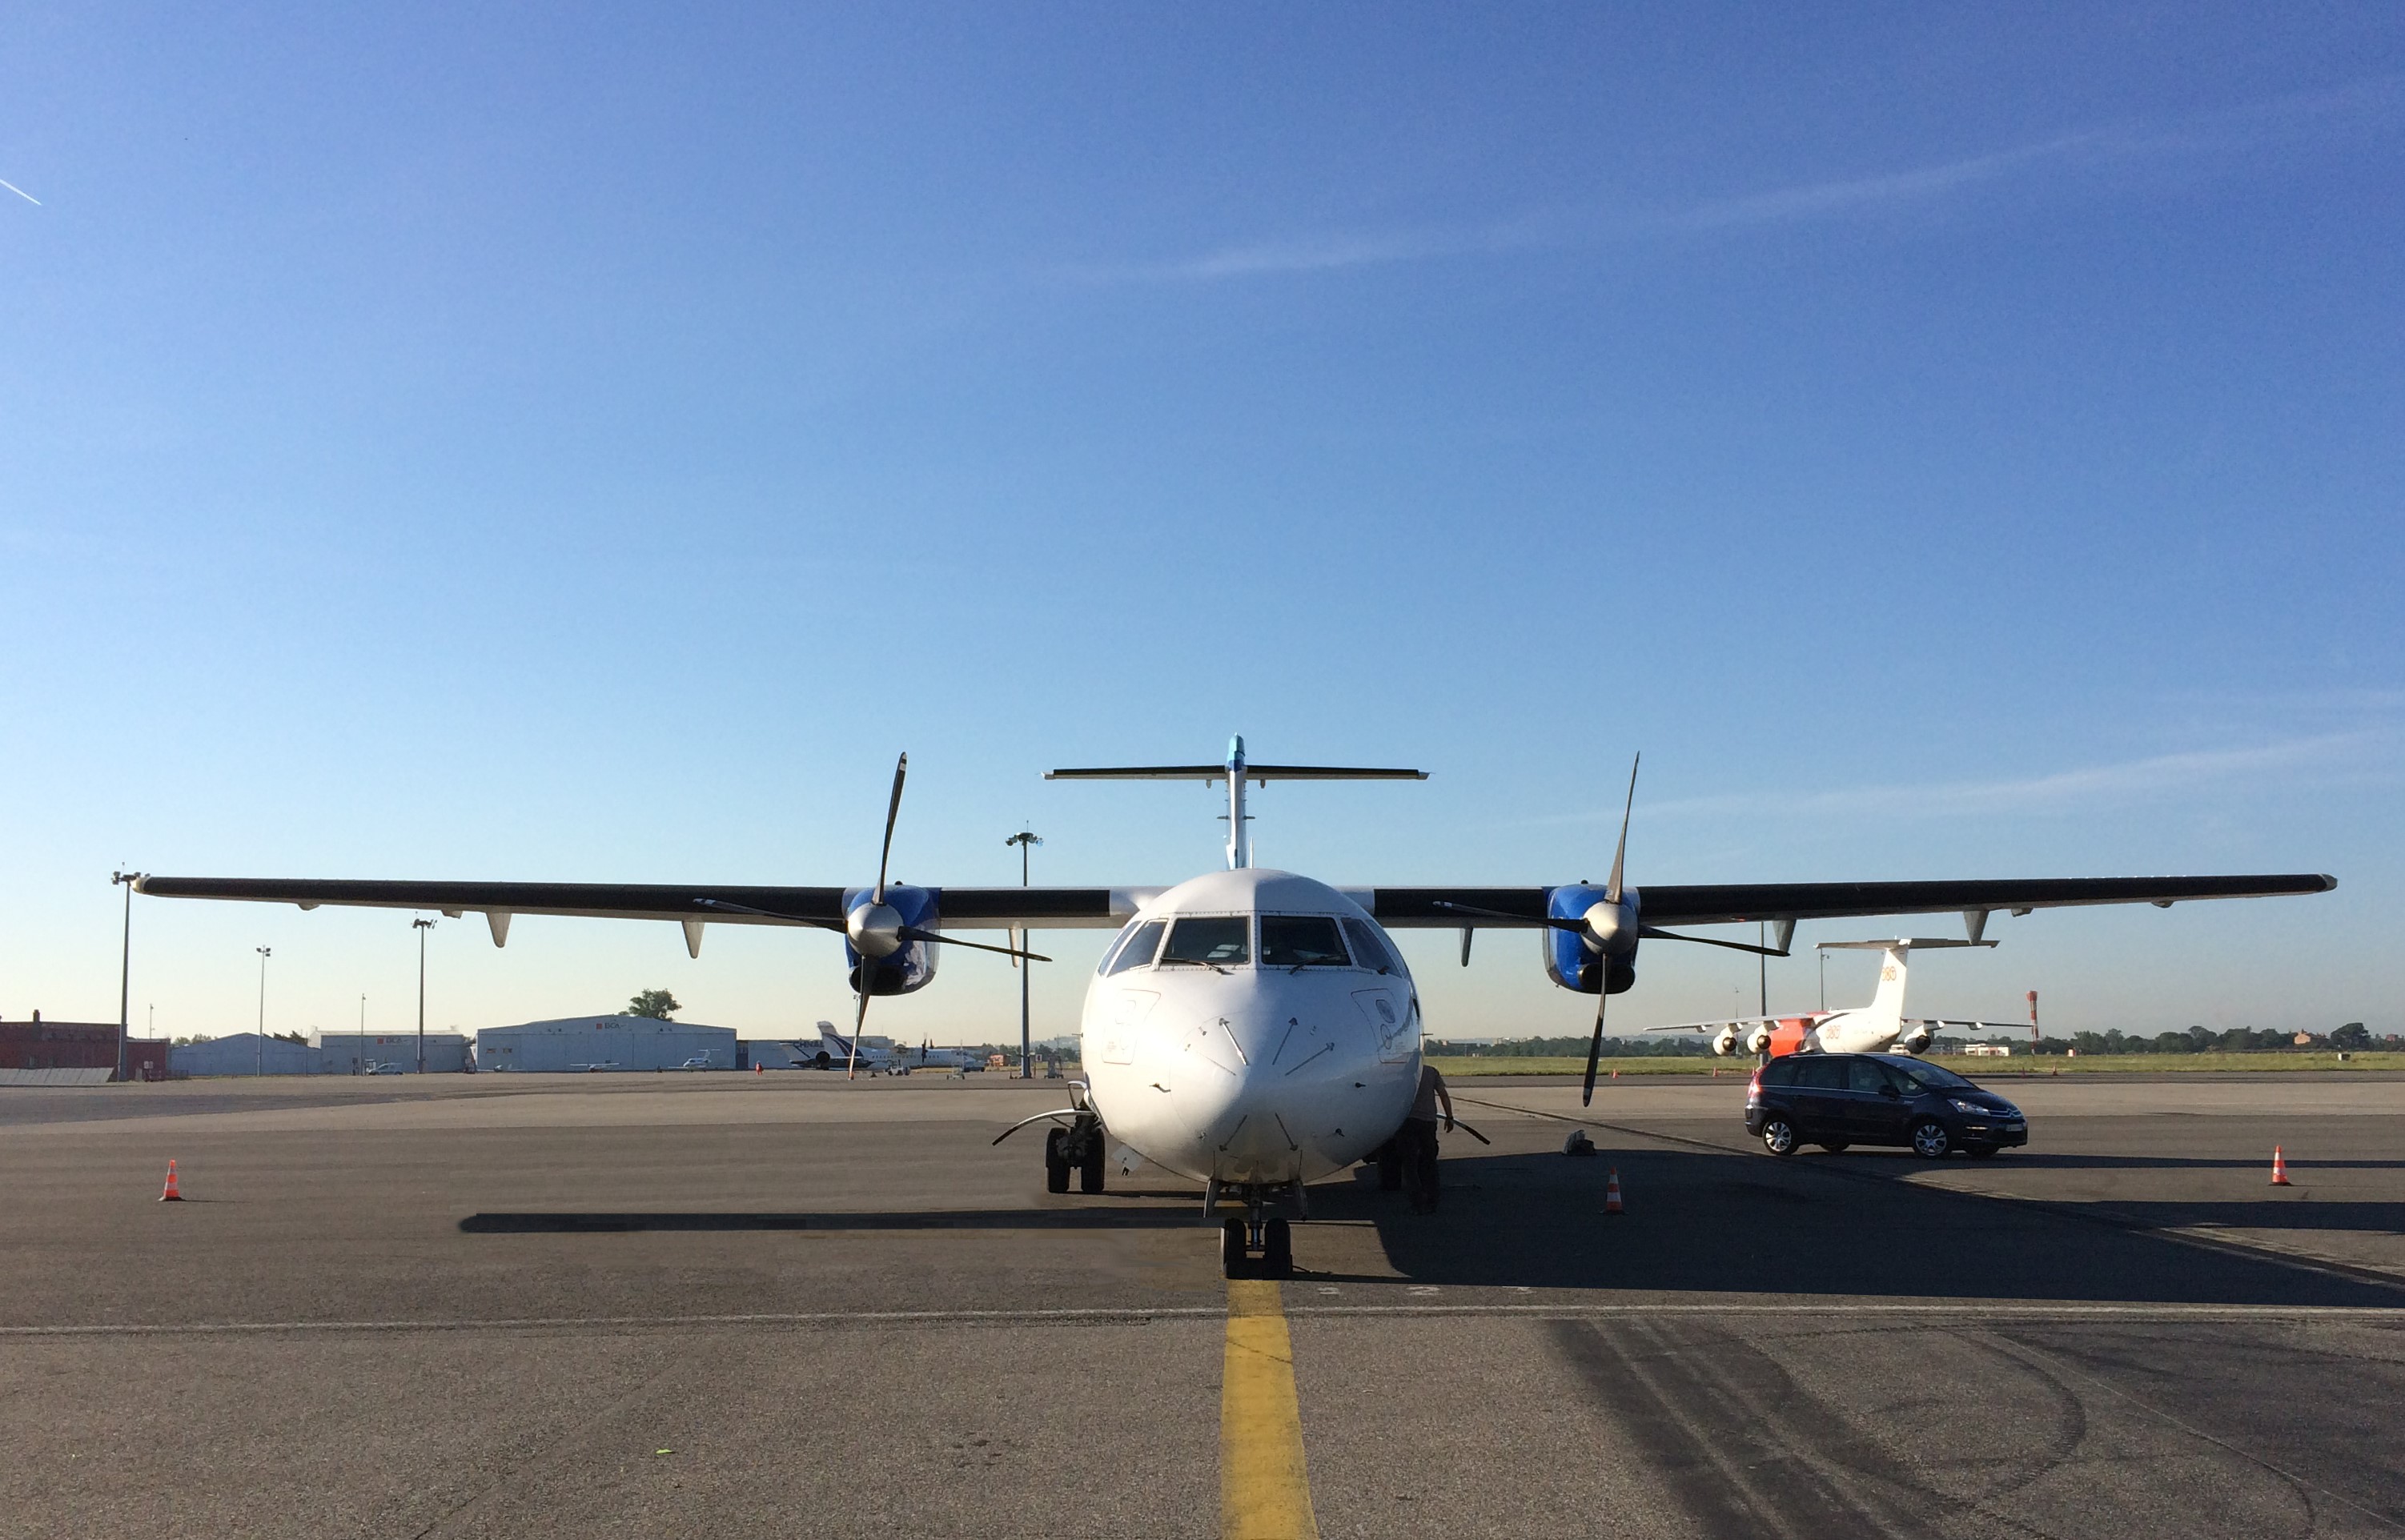 ATR 72-200, MSN 411 sold as the last remaining aircraft from the package of 11